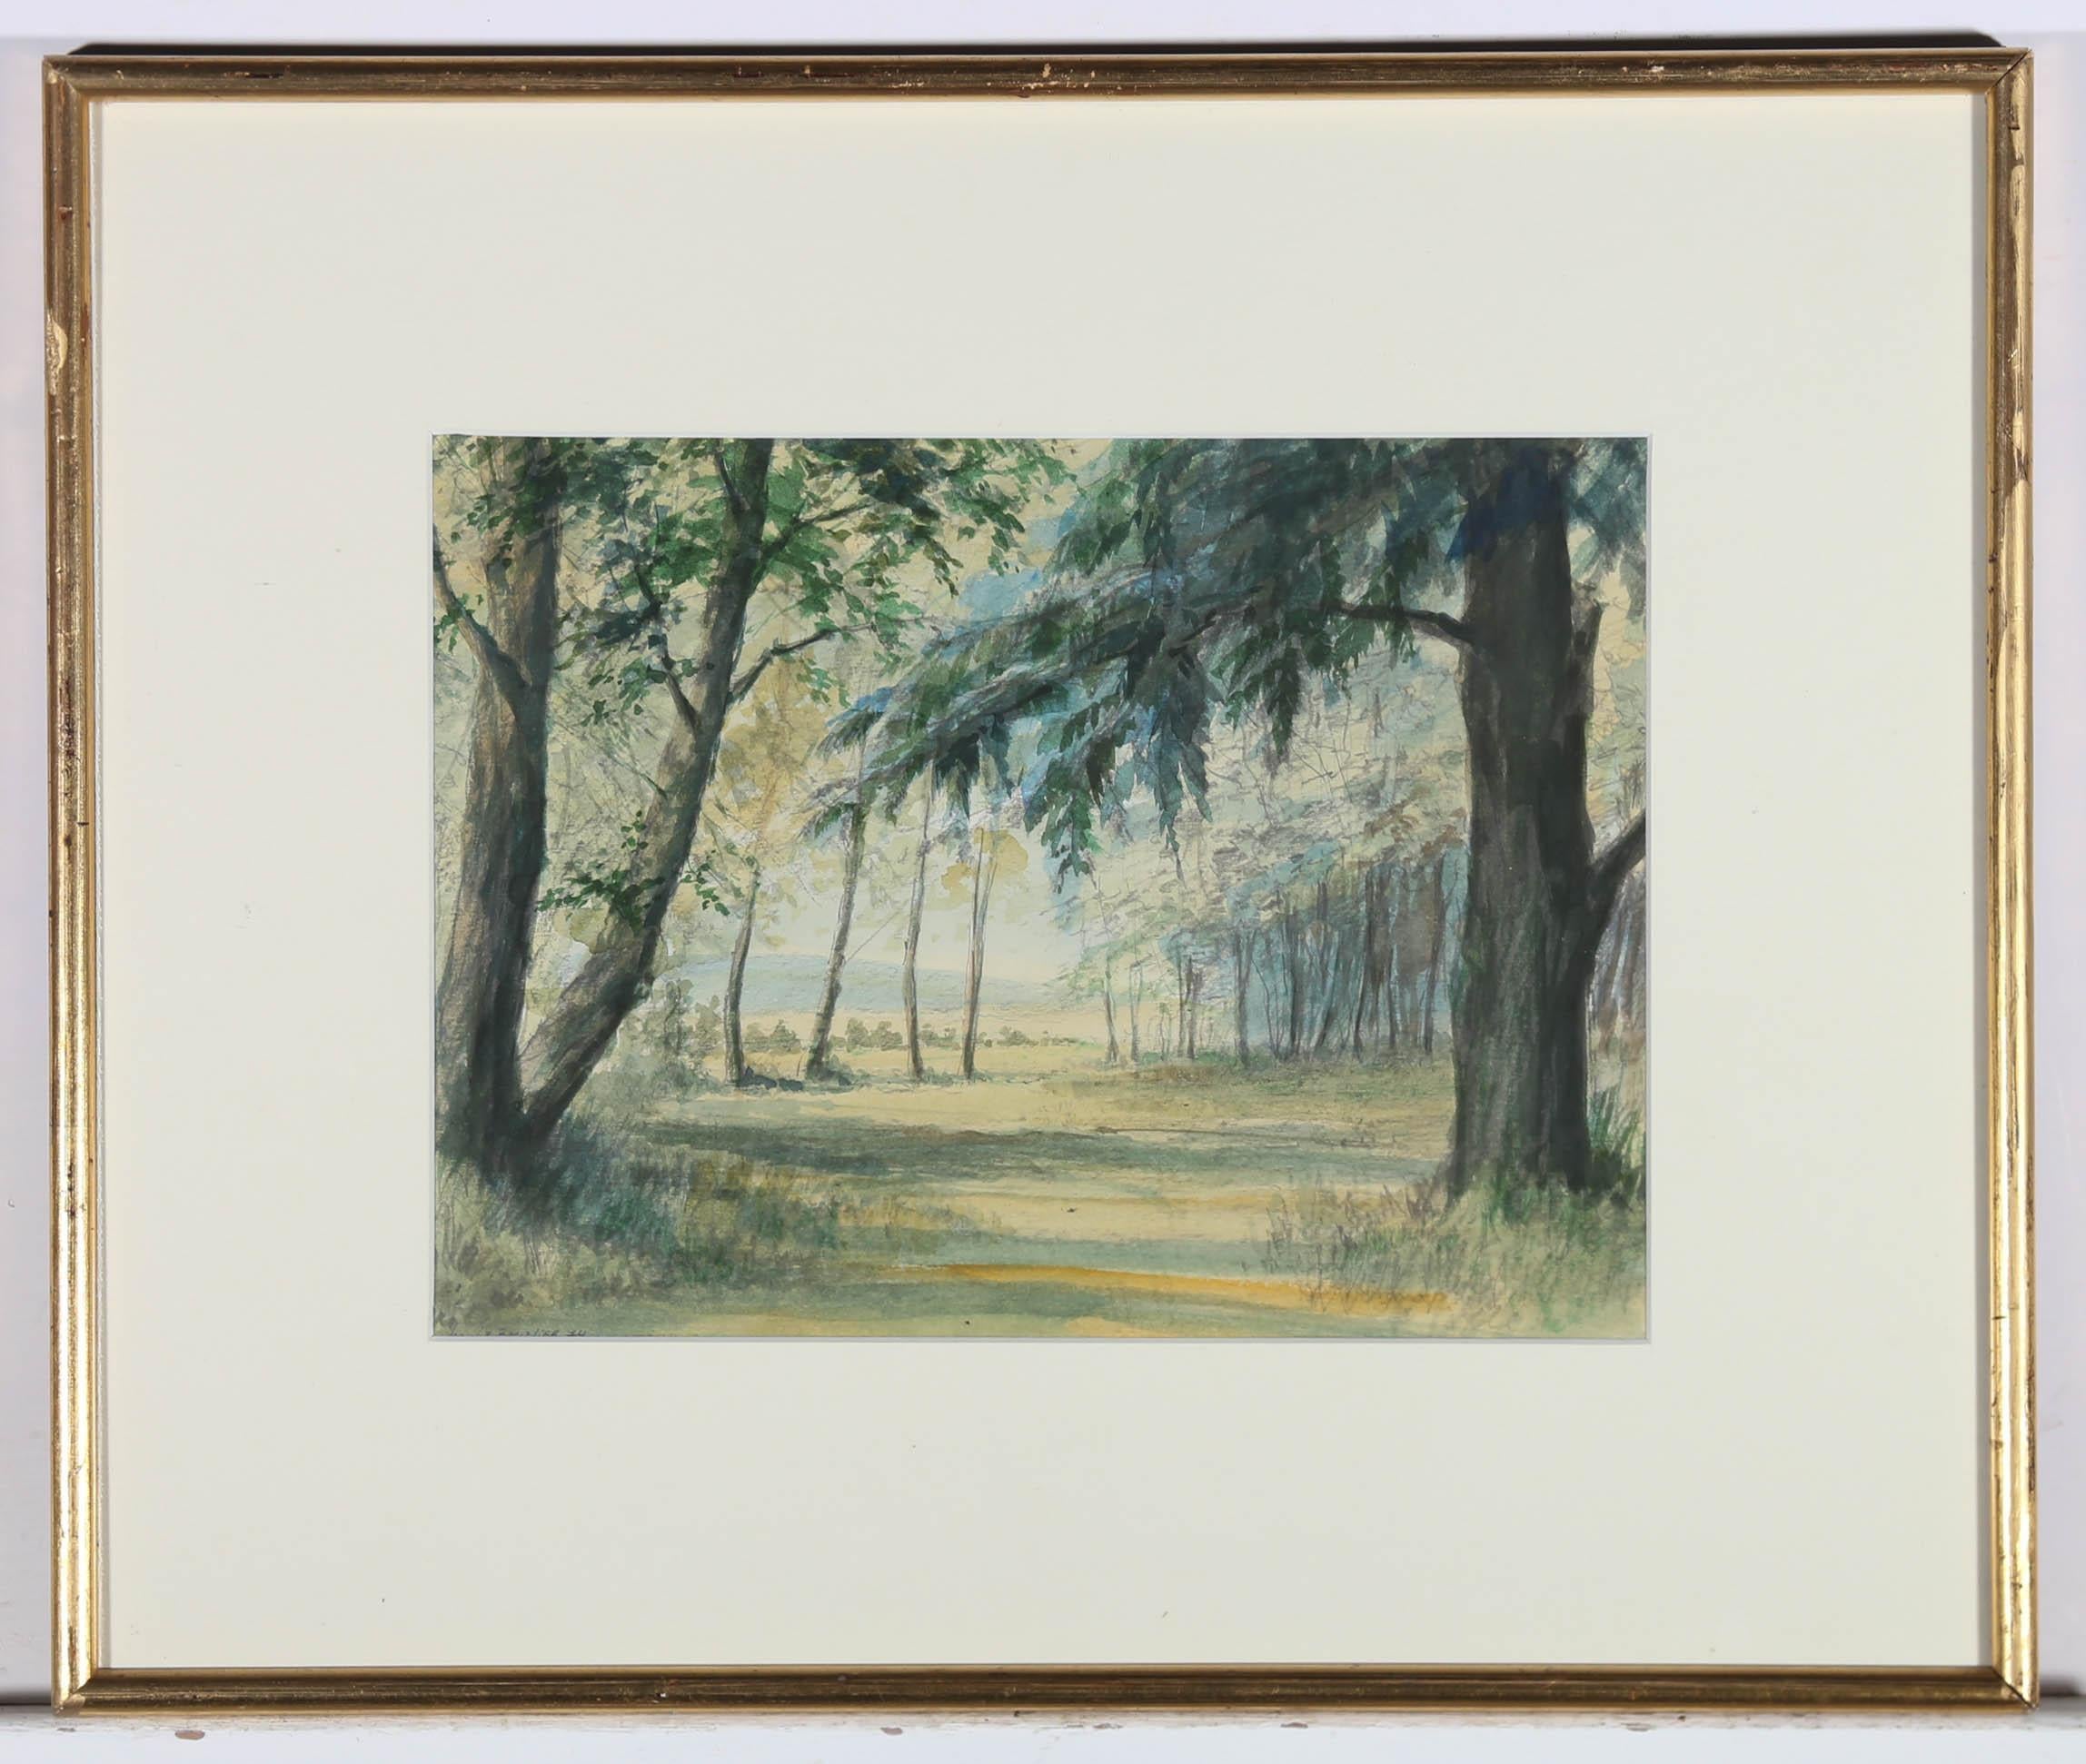 Michel Le Bourlier - 1974 Aquarell, „Towards The Clearing“ im Angebot 2